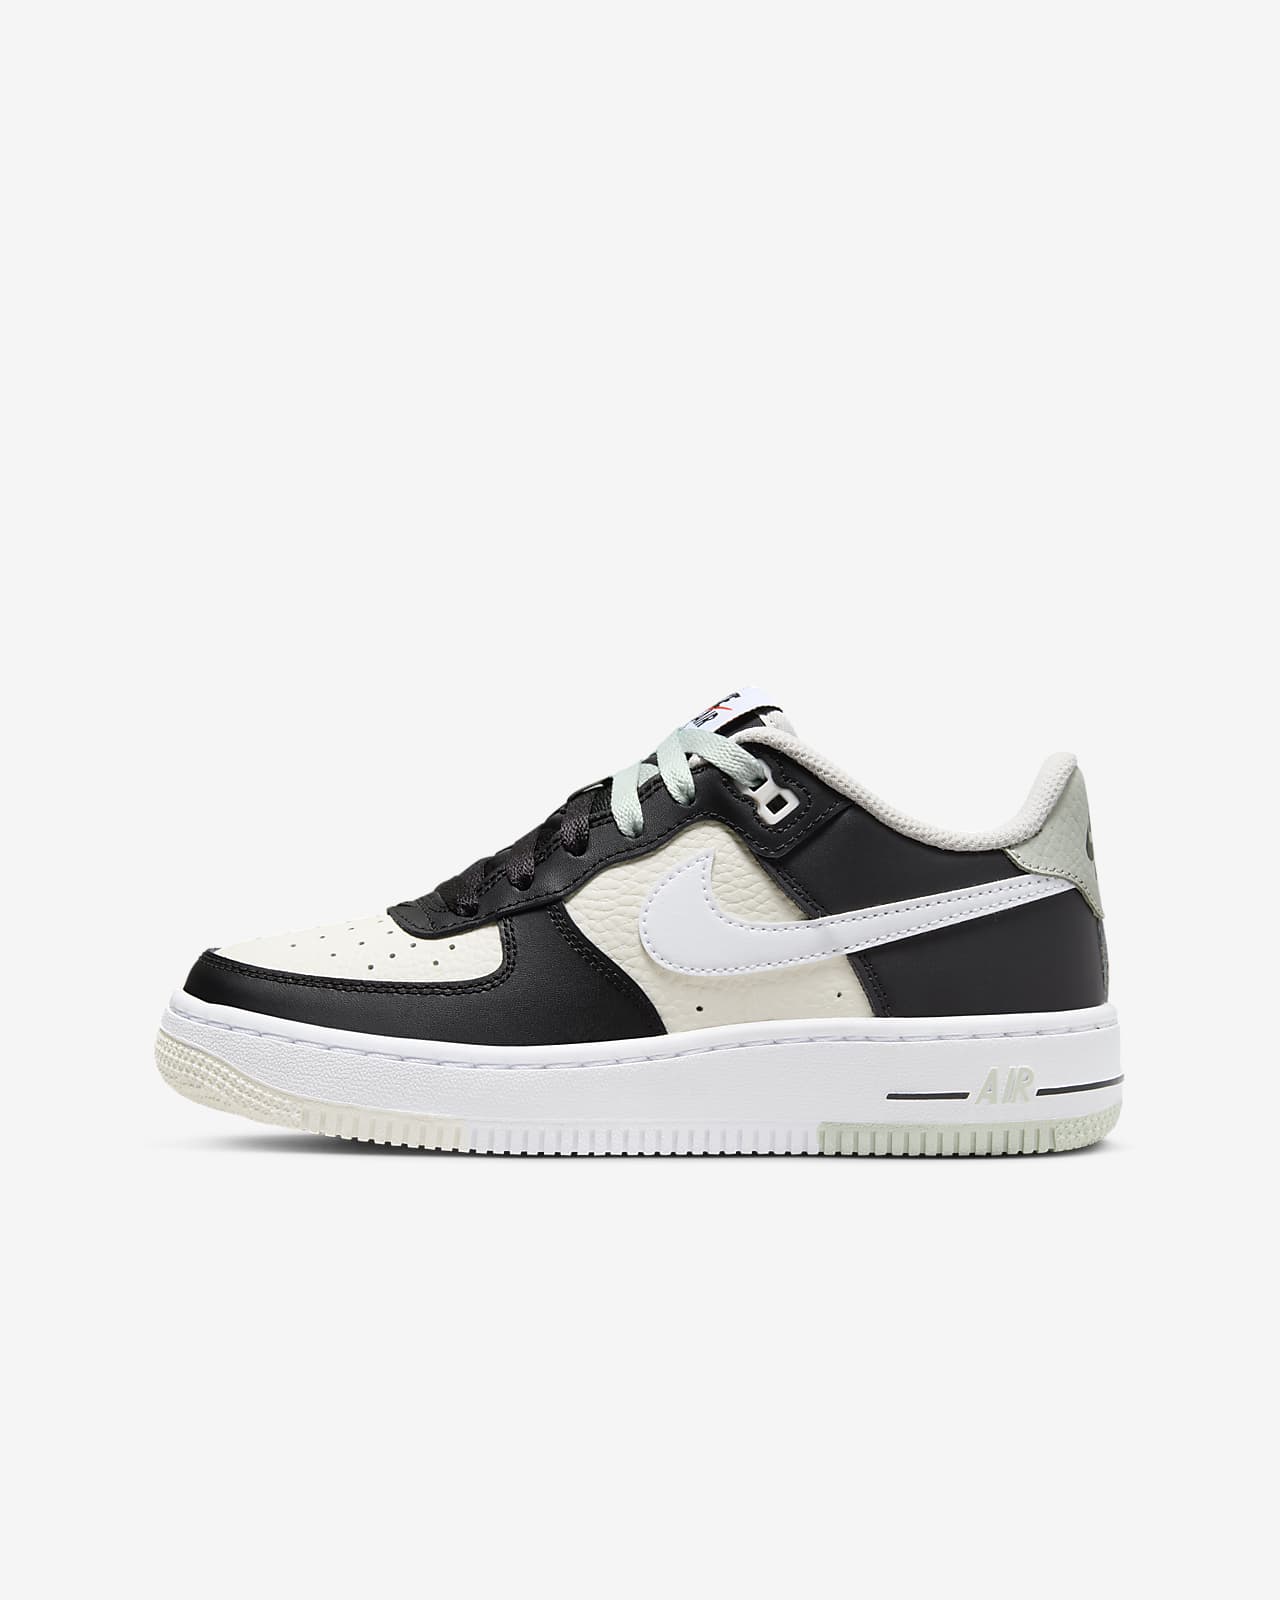 Nike Air Force 1 LV8 KSA Athletic Shoes 'Worldwide Pack'